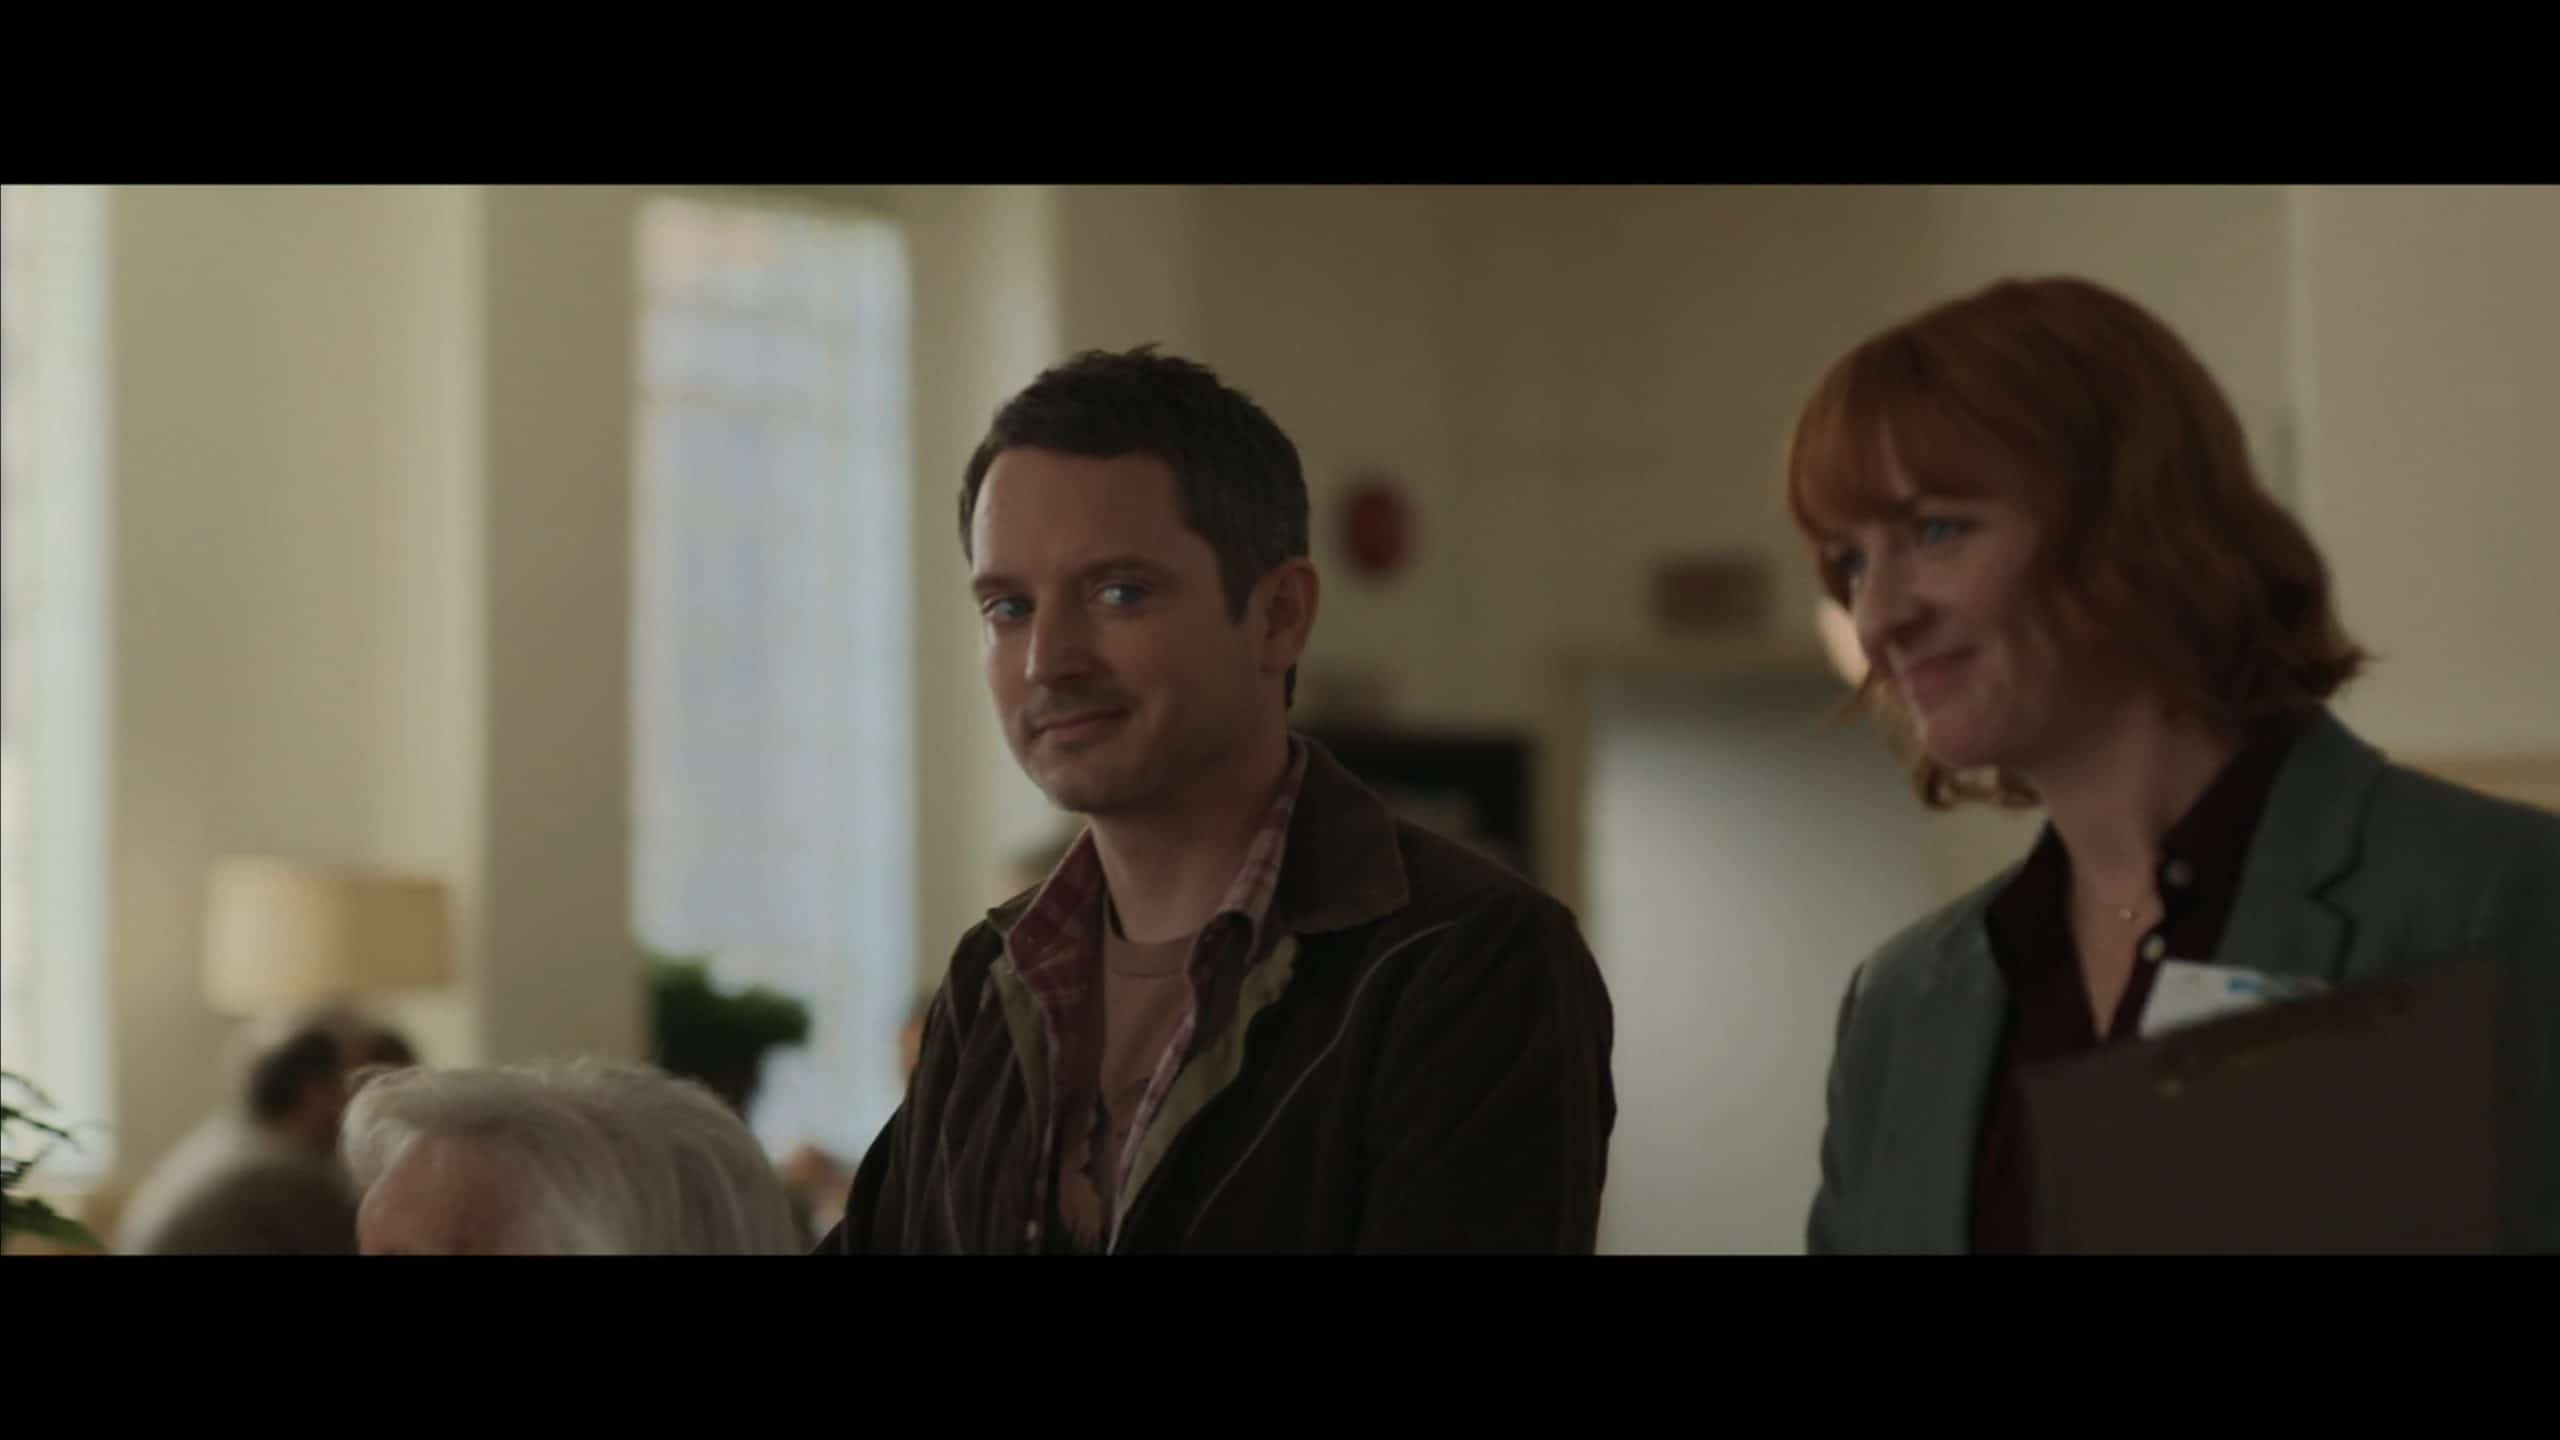 Walter (Elijah Wood) checking out a nursing facility, the one Misty works at, for his mother